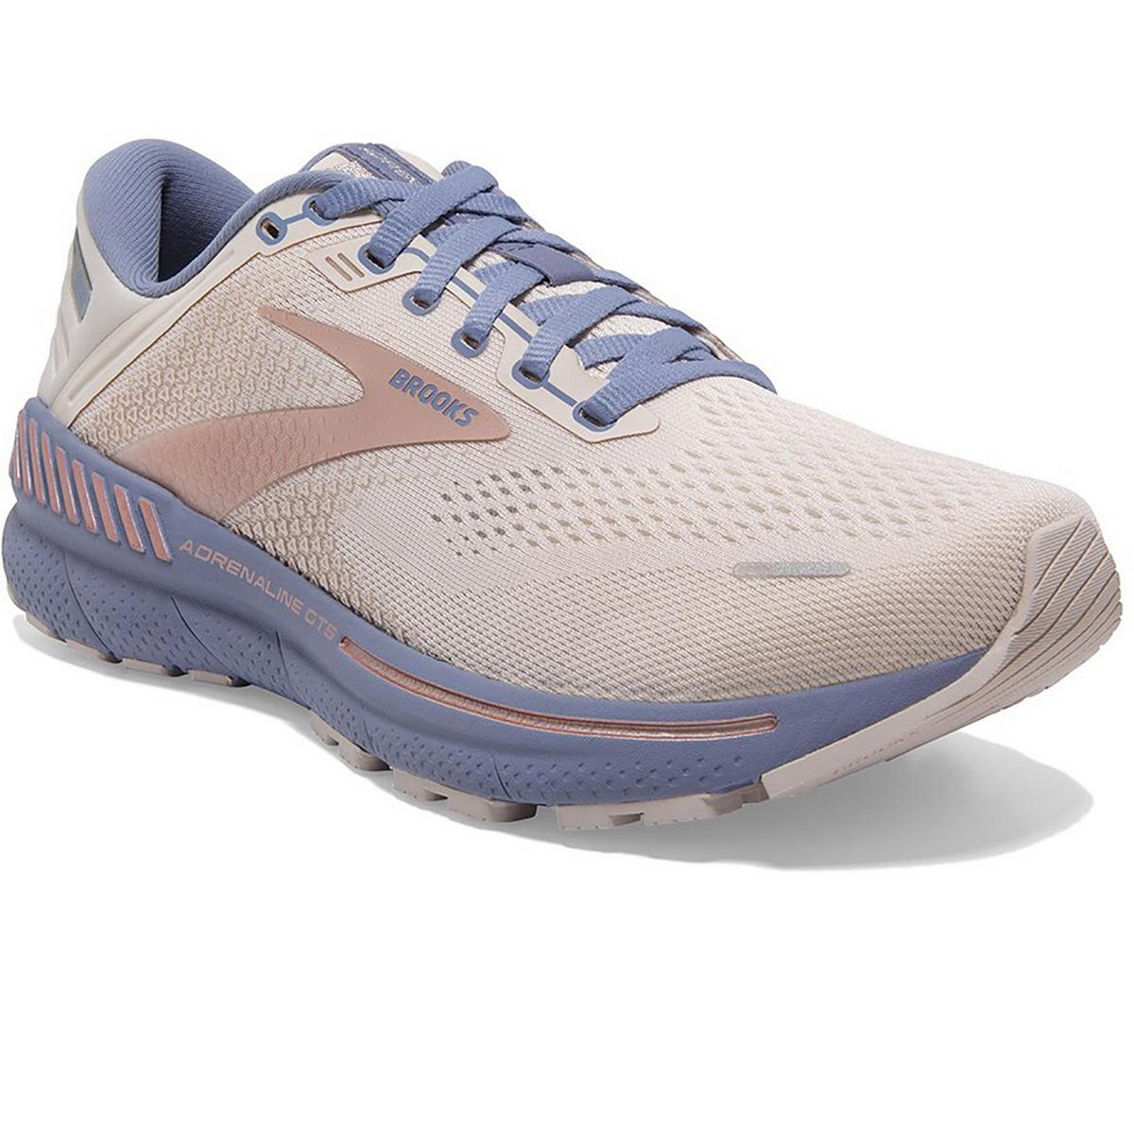 Adrenaline GTS 22 Womens Workout Fitness Athletic and Training Shoes - Image 5 of 5